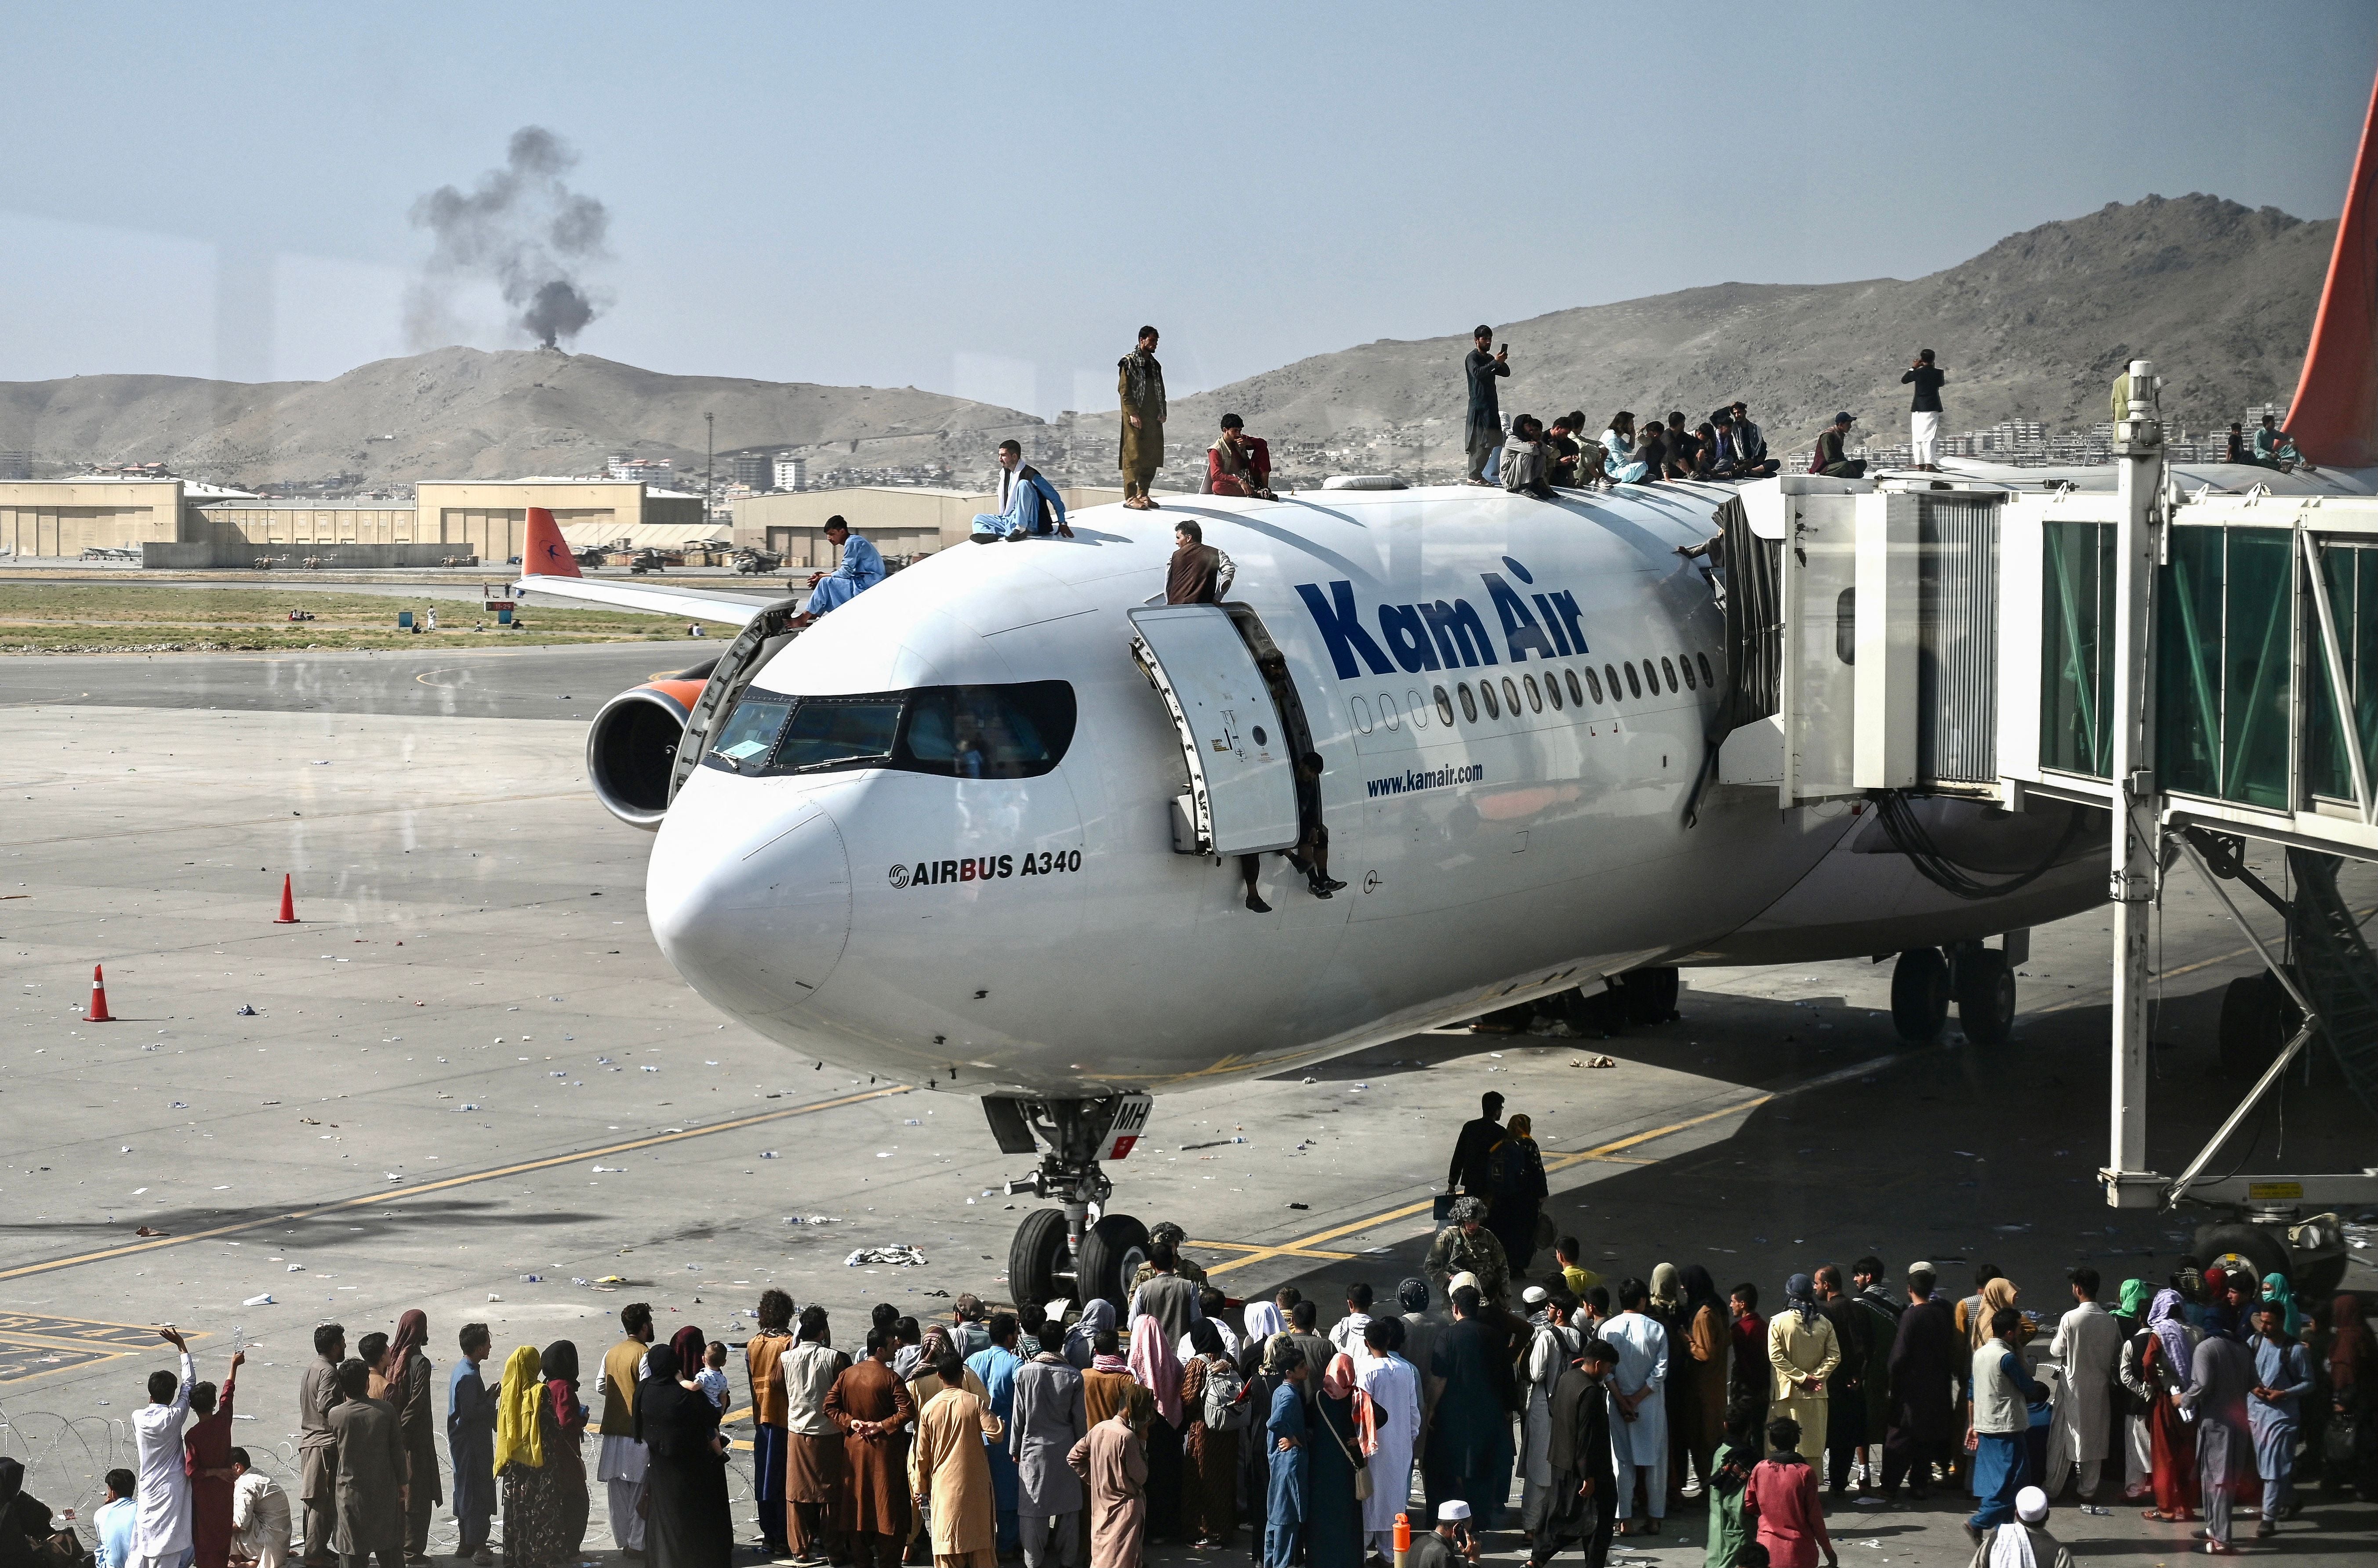 Desperate people climb on top of a plane at Kabul airport on 16 August 16, 2021, after a stunningly swift end to Afghanistan's 20-year war